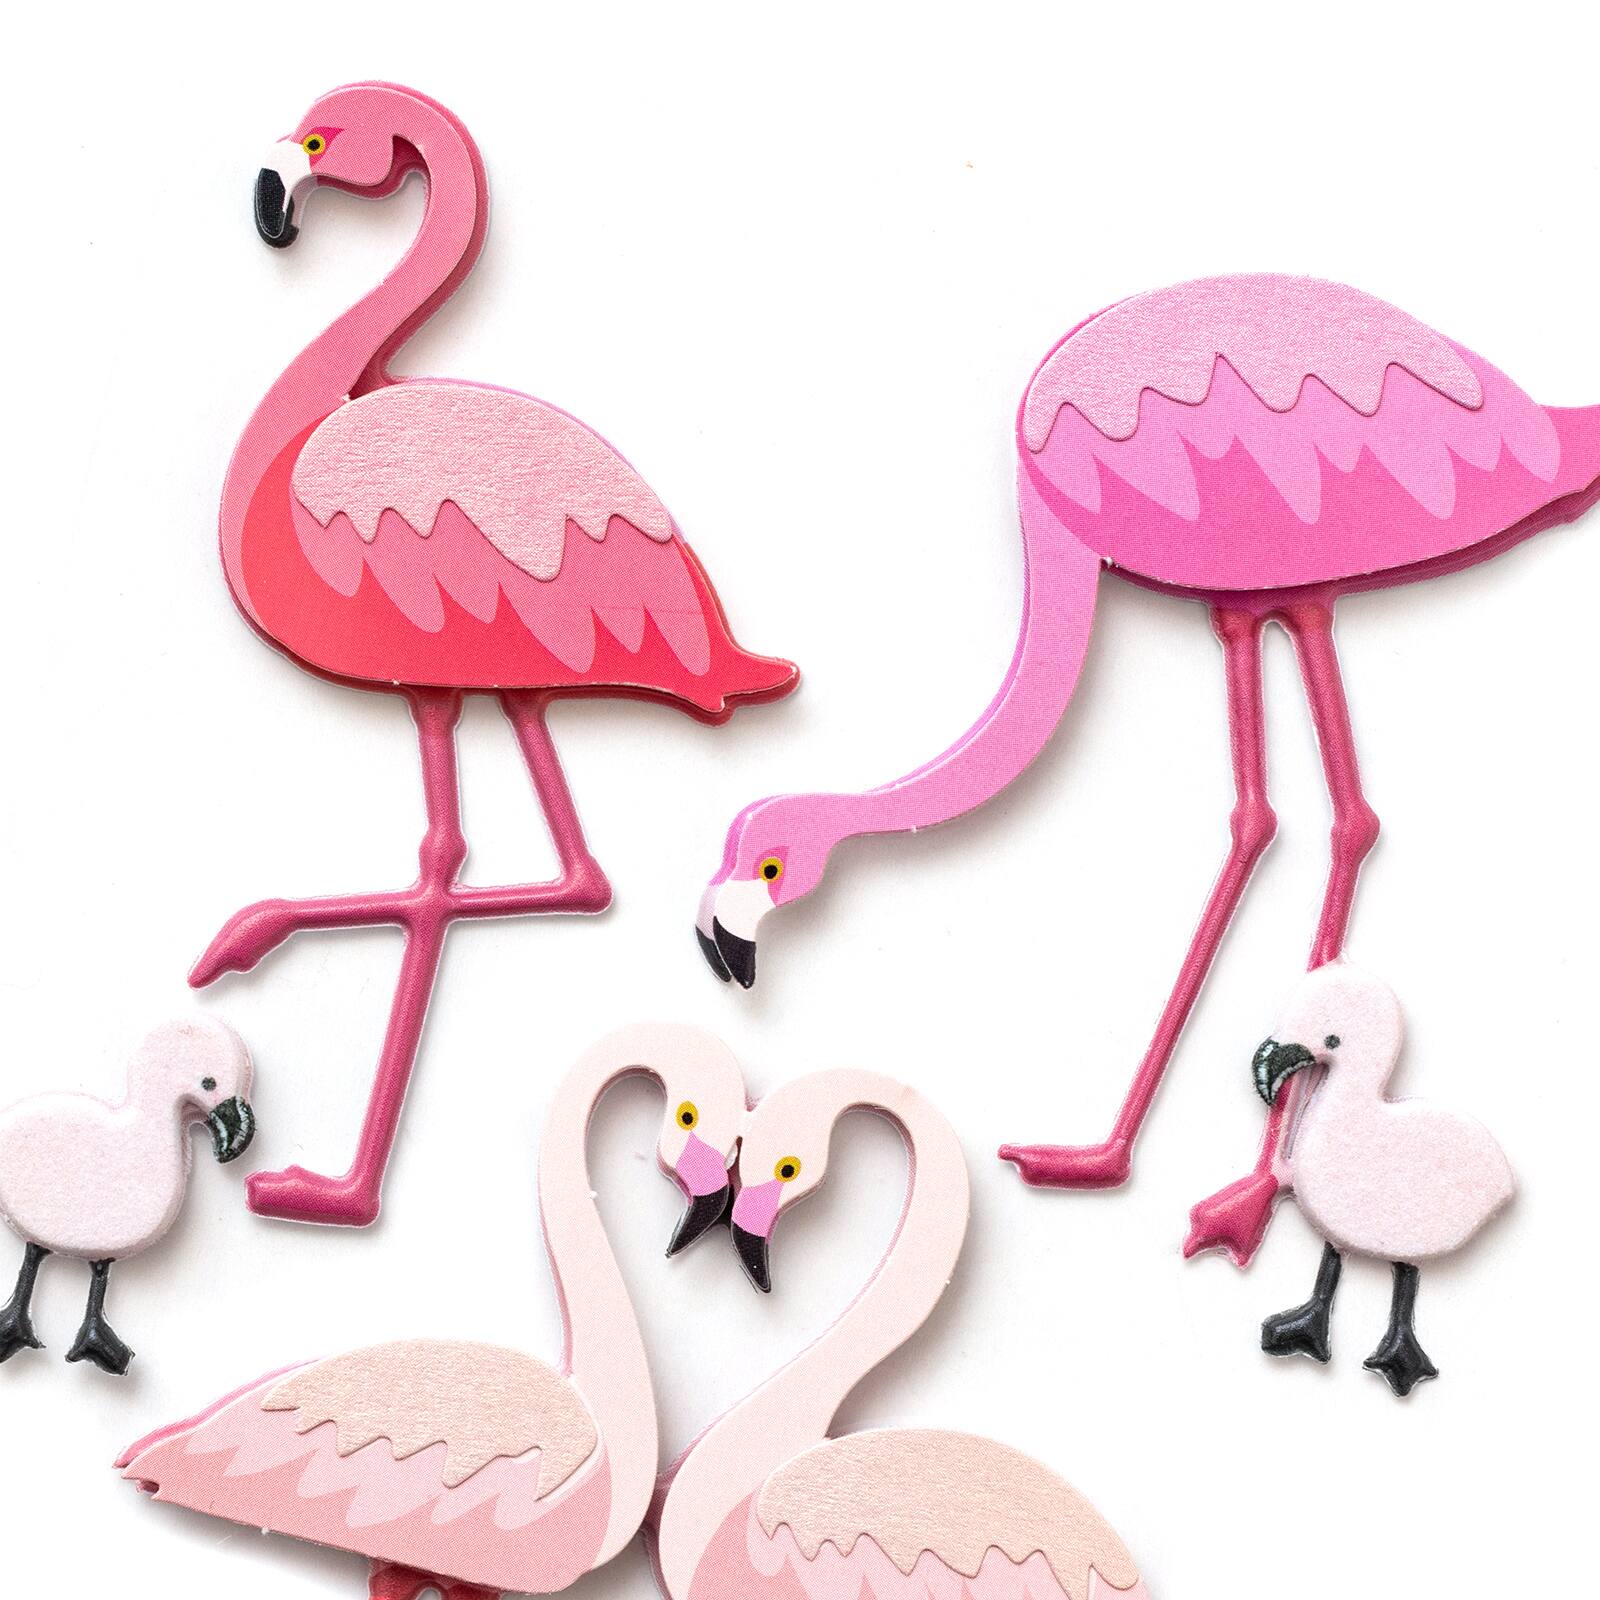 45 FLAMINGO STICKERS-SCRAPBOOKING FLAMINGOS EMBELLISHMENTS-STICKY PAPER LABELS 